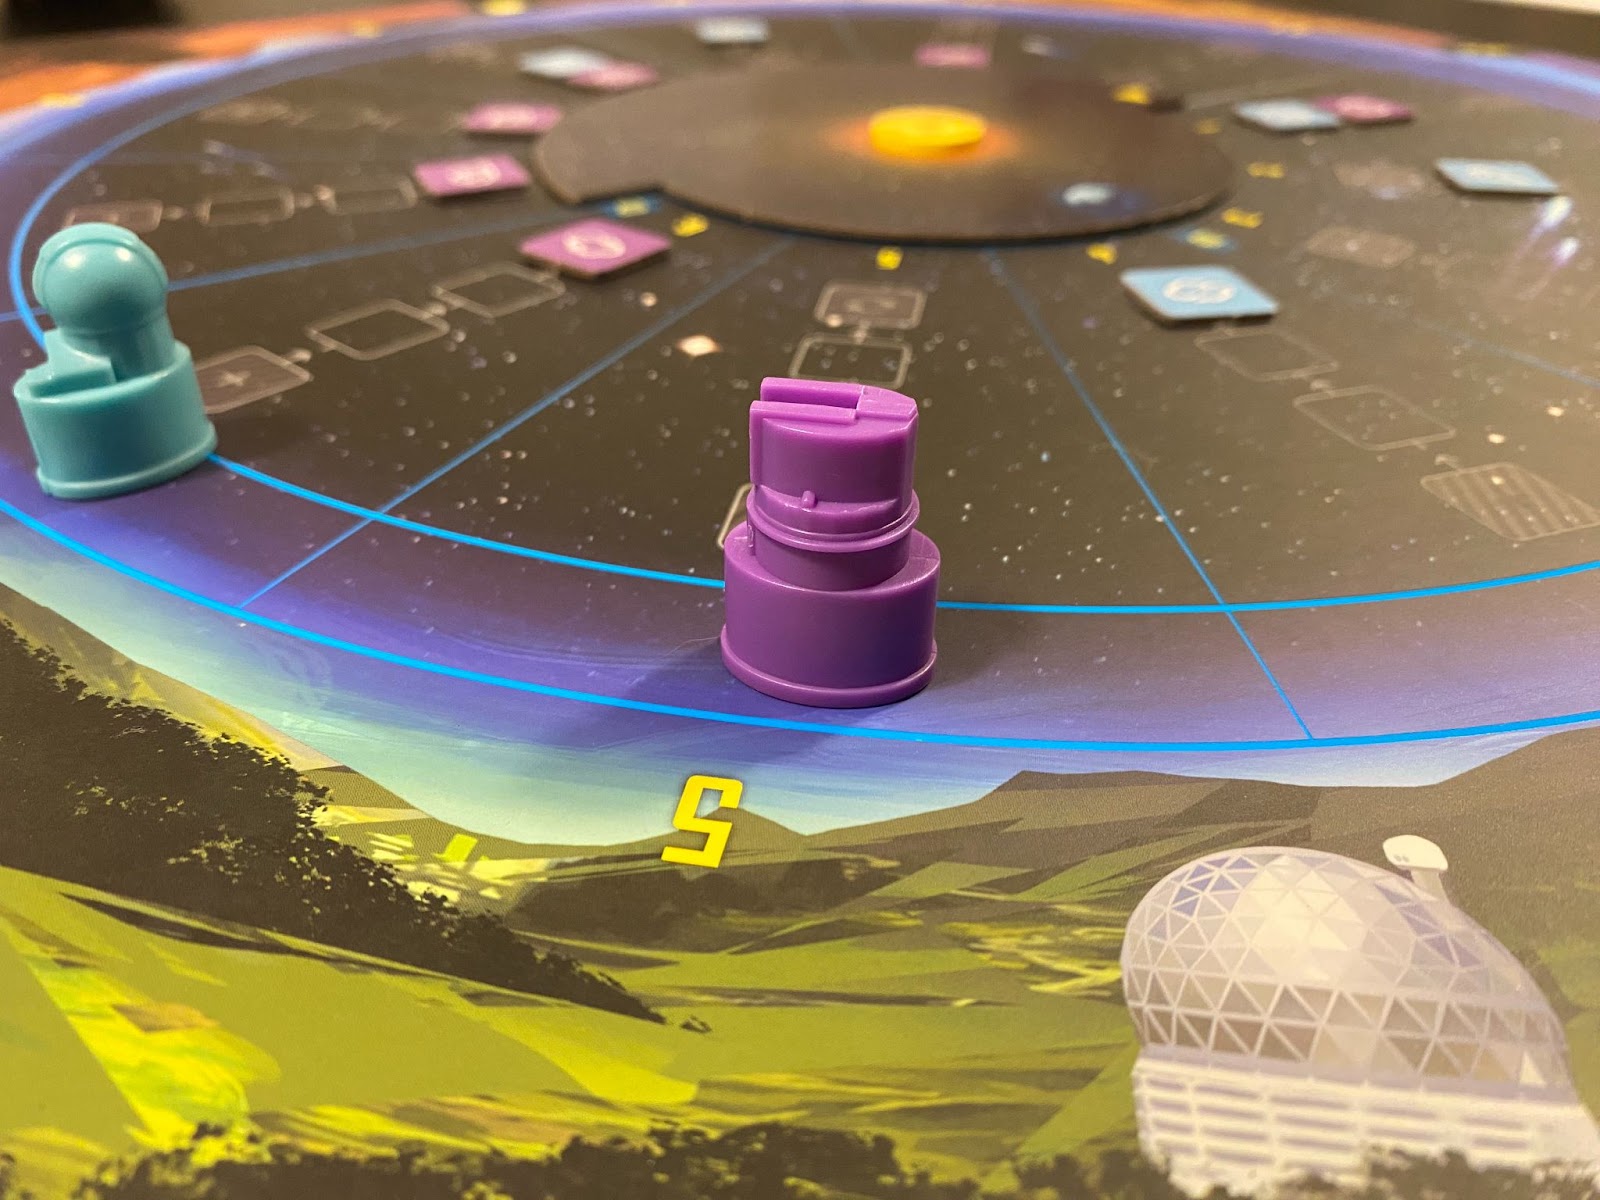 Picture of "Search for Planet X" game board - two plastic telescope token going around a circle.